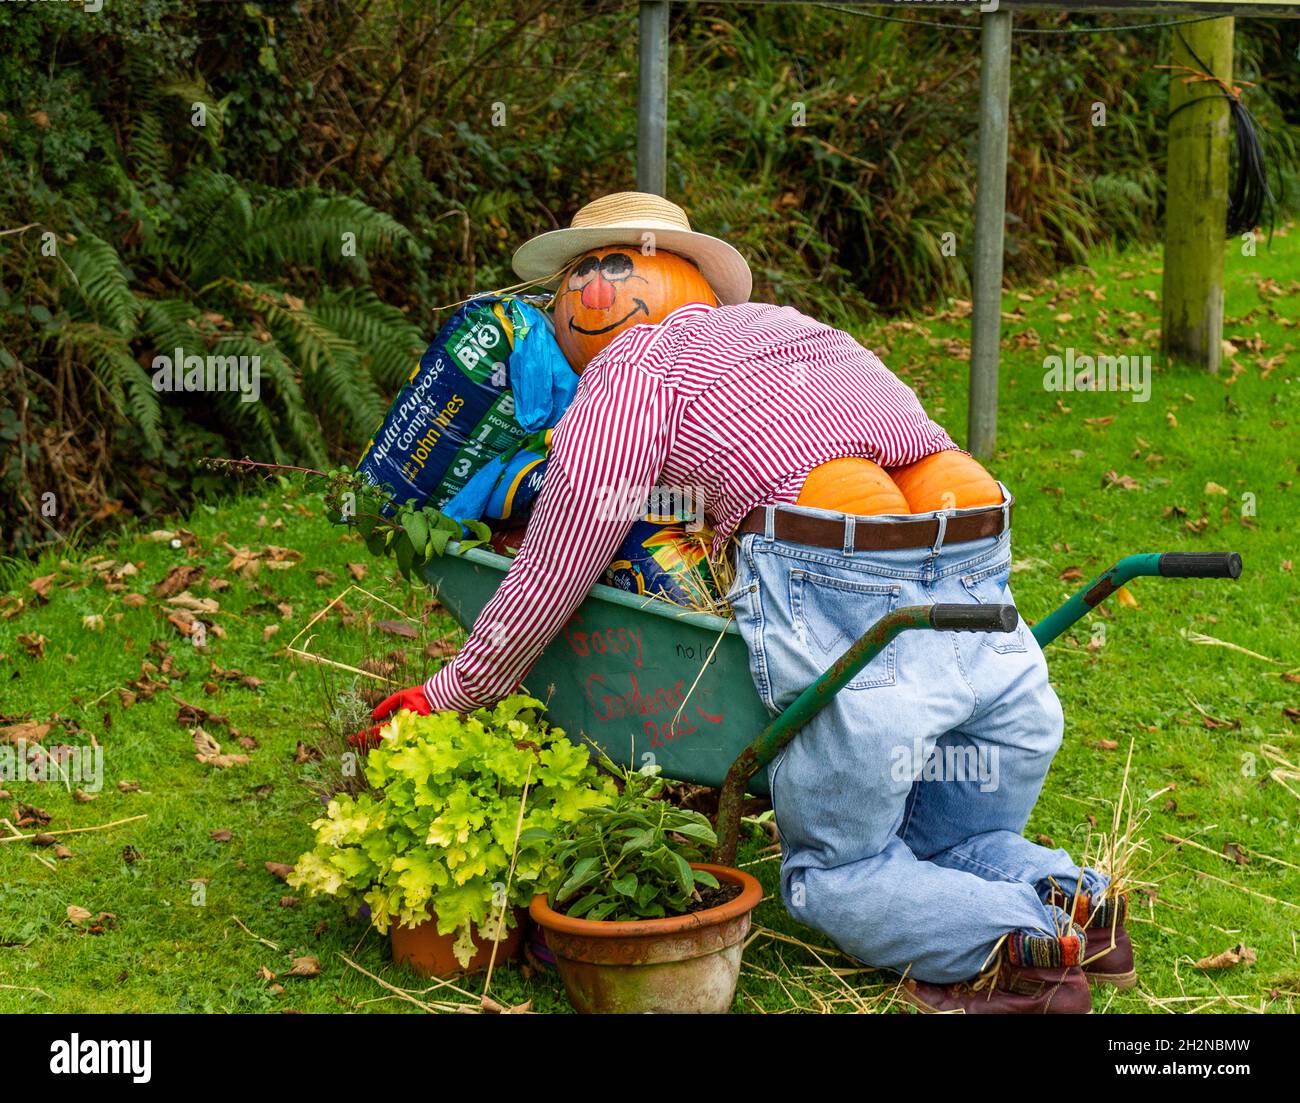 Scarecrow made from Pumpkins leaning on a wheelbarrow Stock Photo